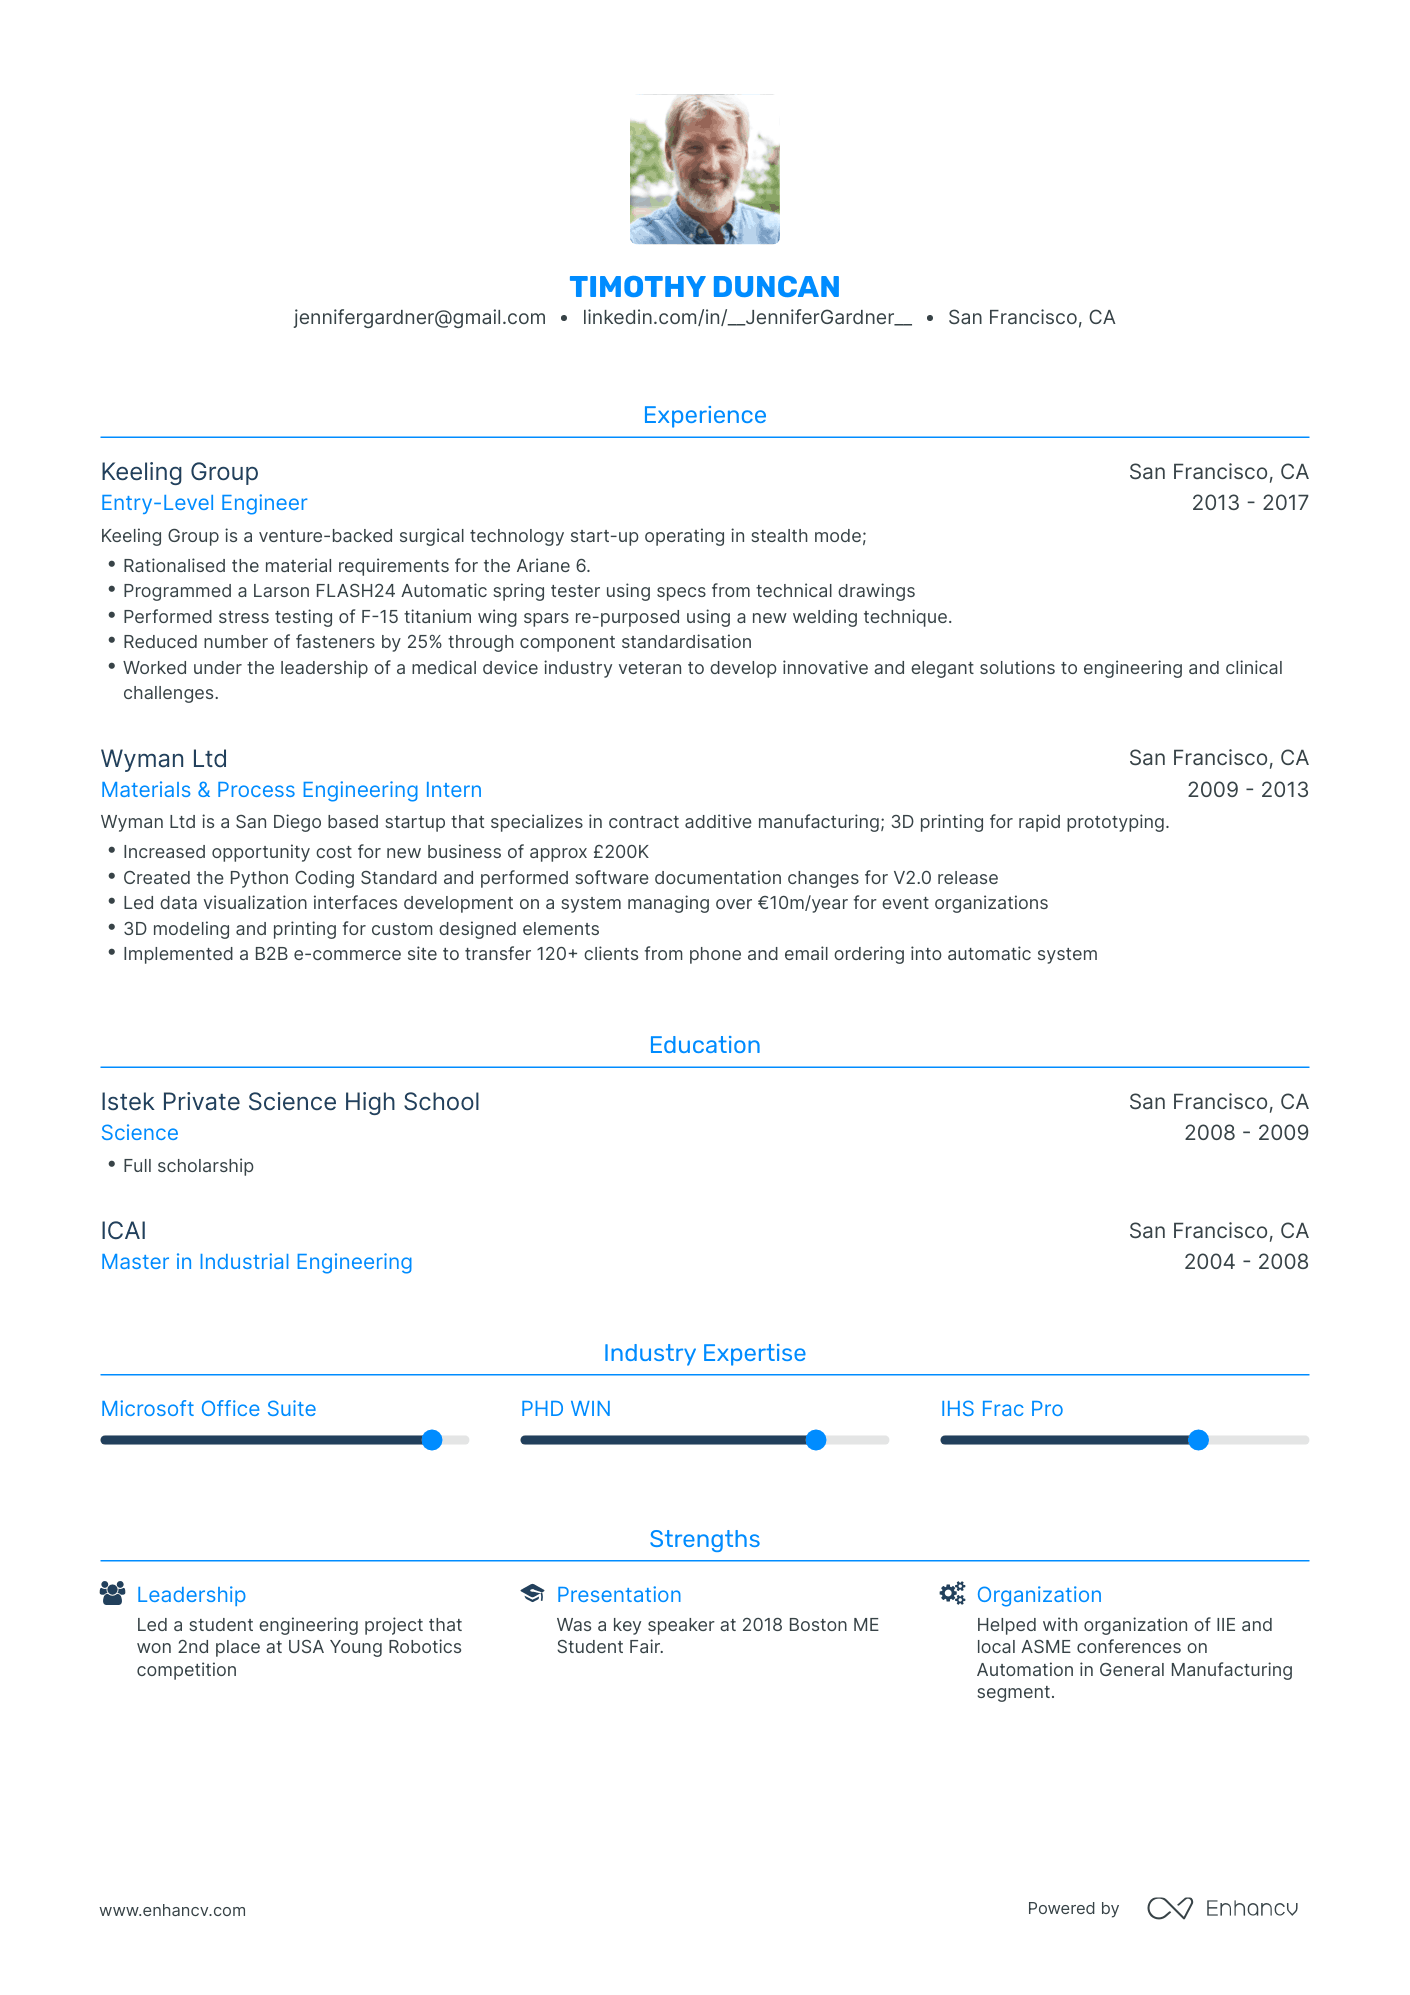 Traditional Entry Level Engineering Resume Template